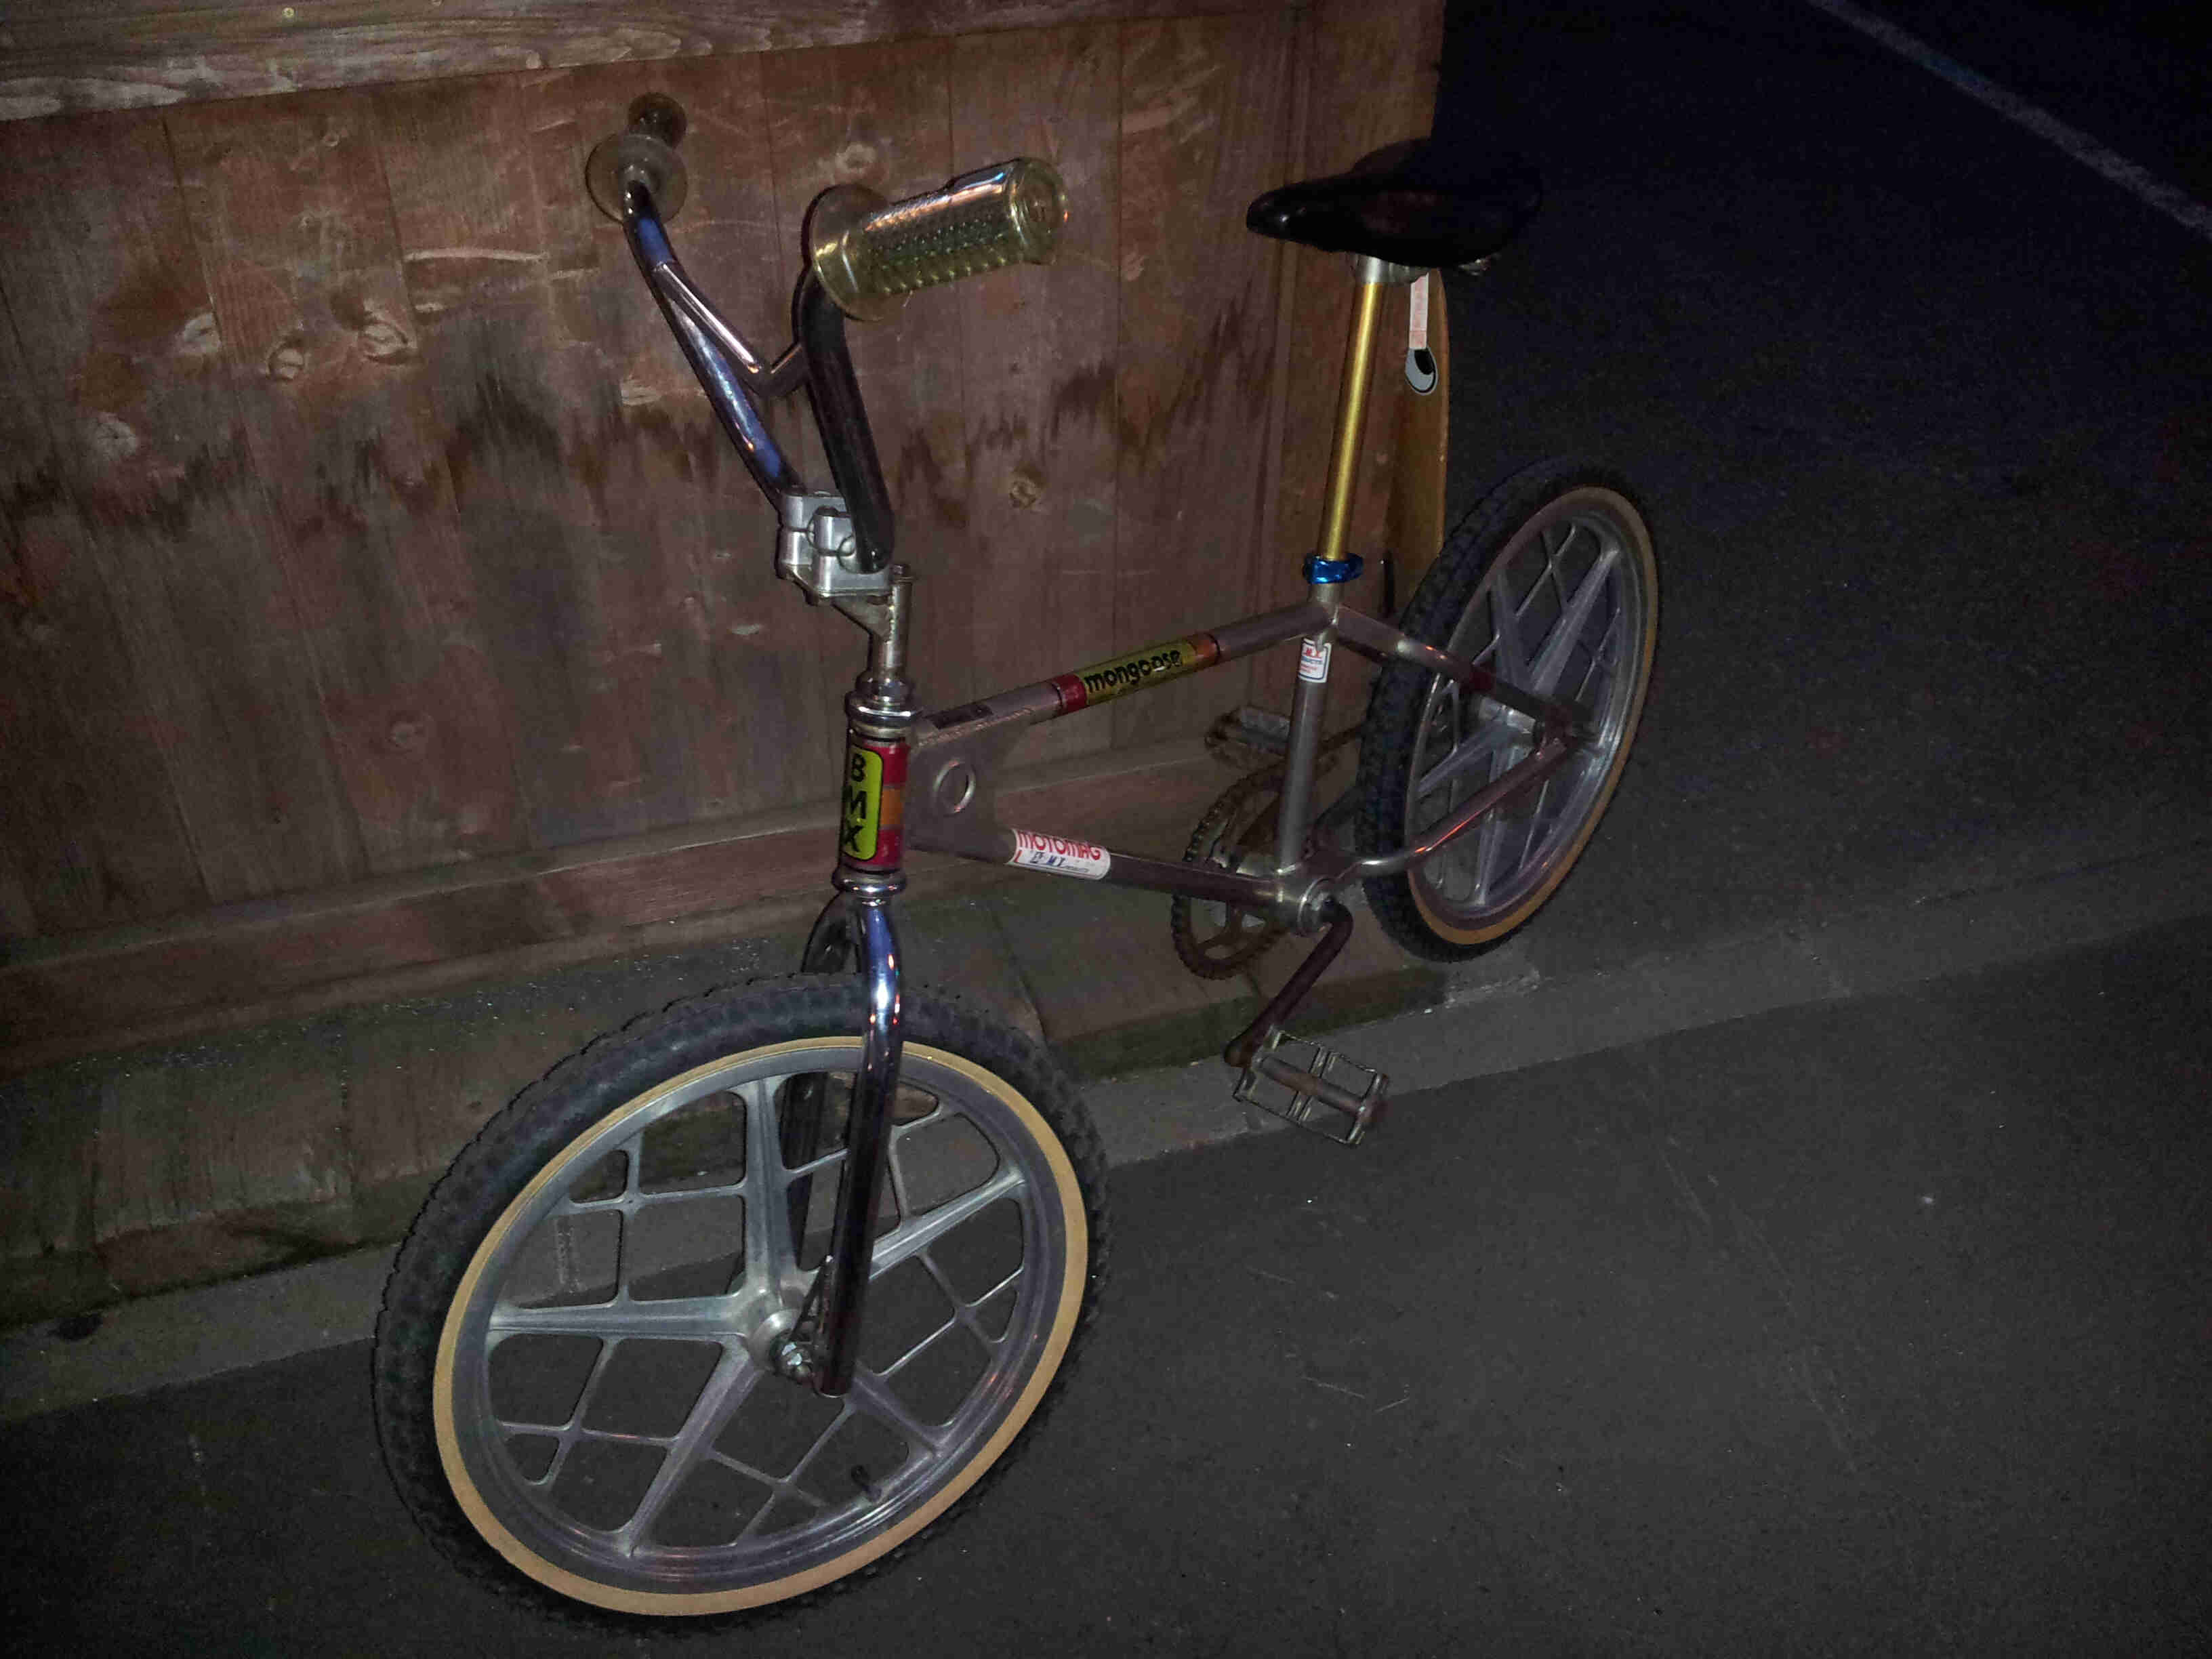 Left side, dimly lit view of a chrome BMX bike, leaning against a wood wall